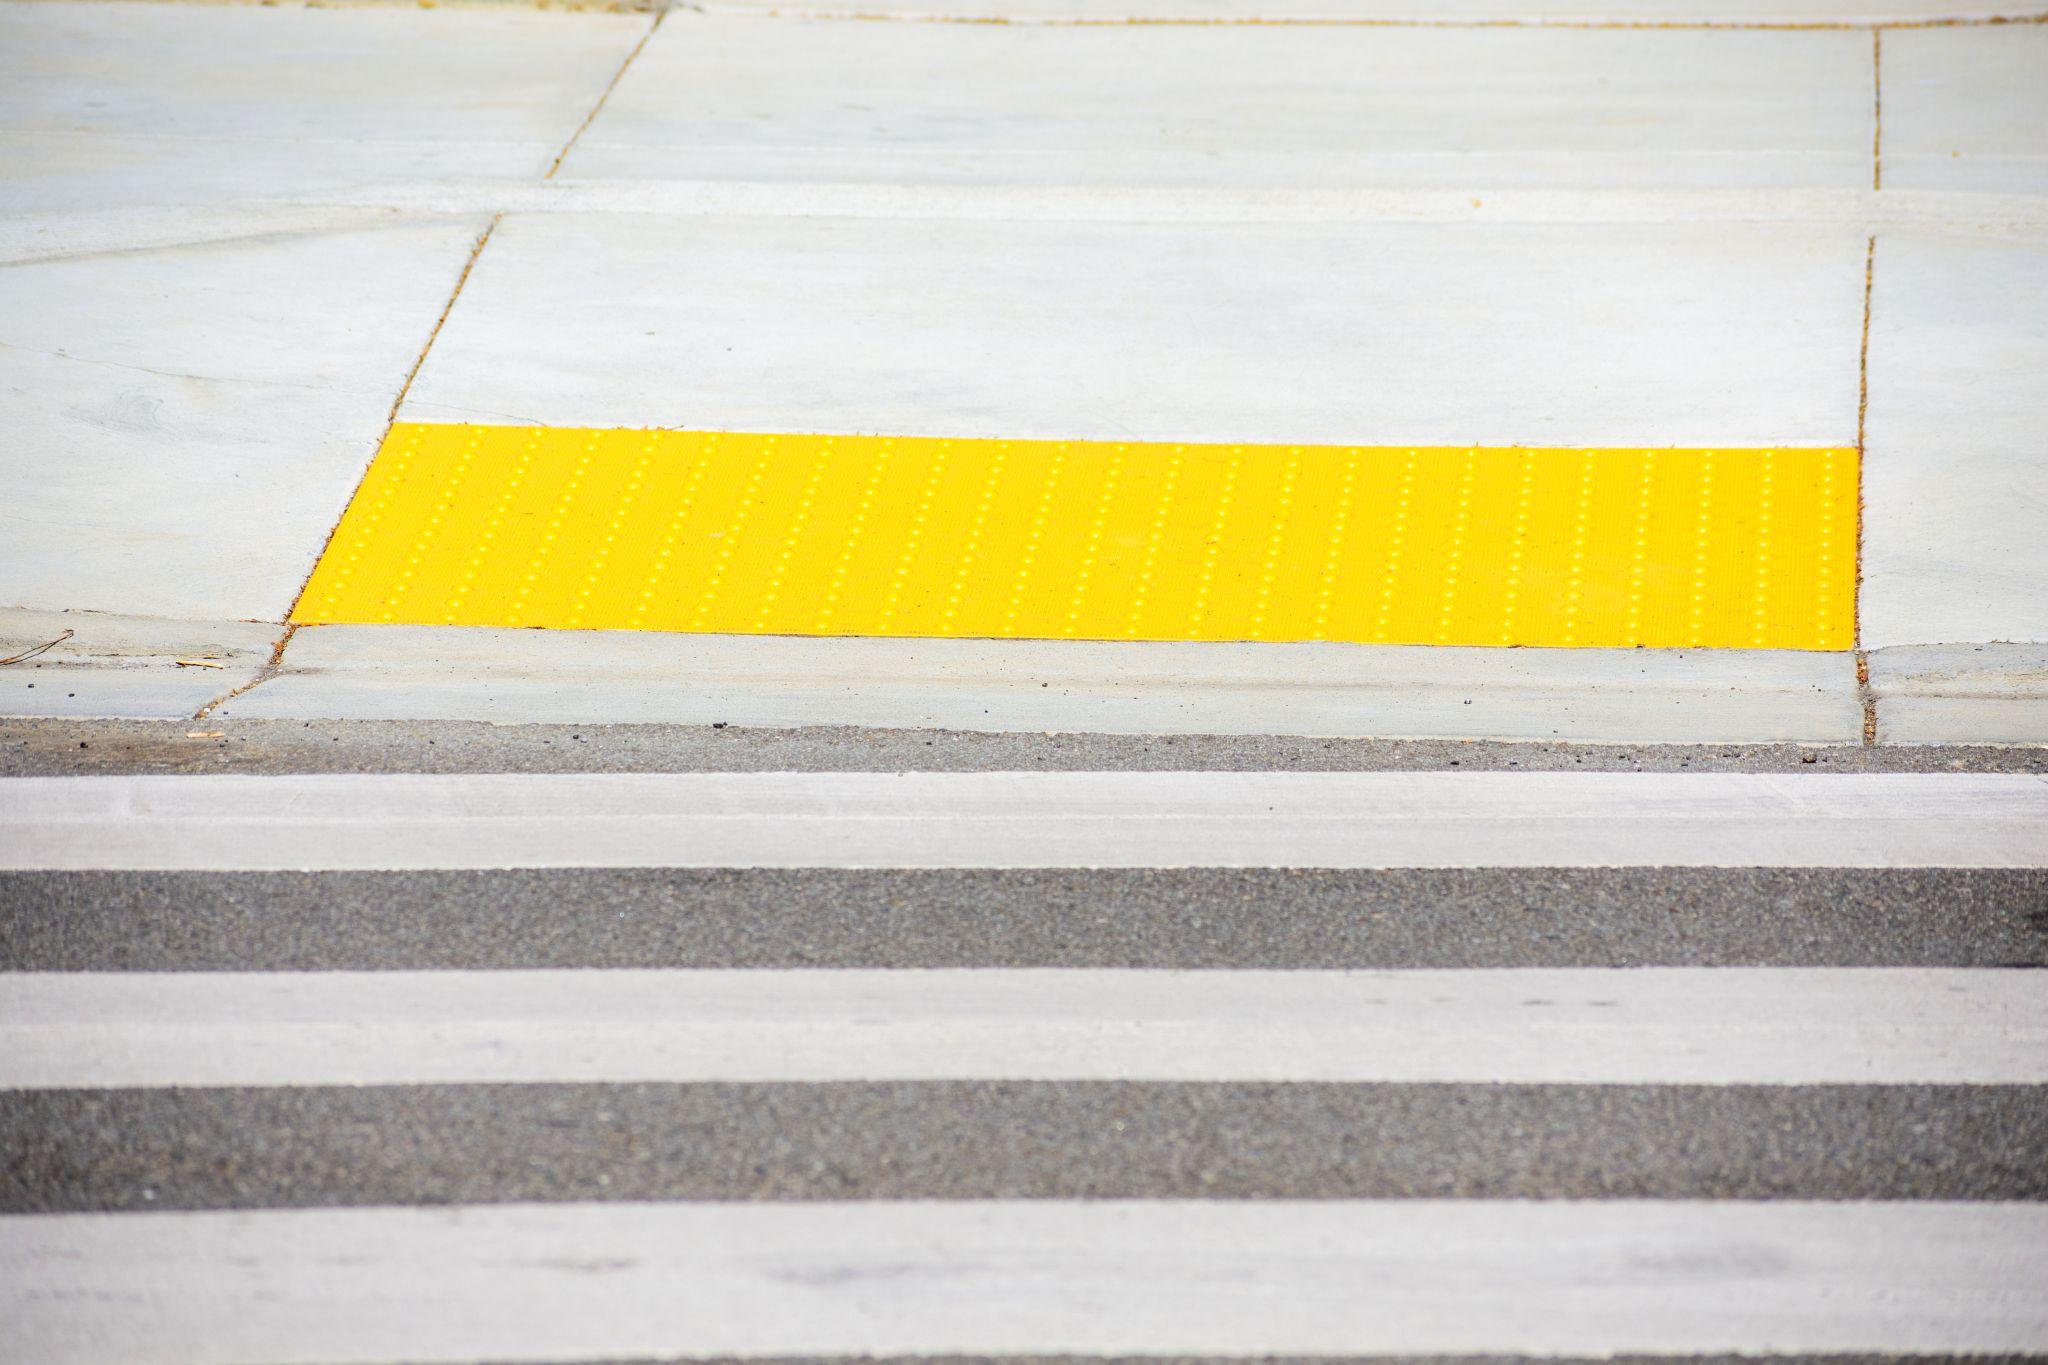 Pedestrian crossing leads to yellow detectable warning surface tactile paving